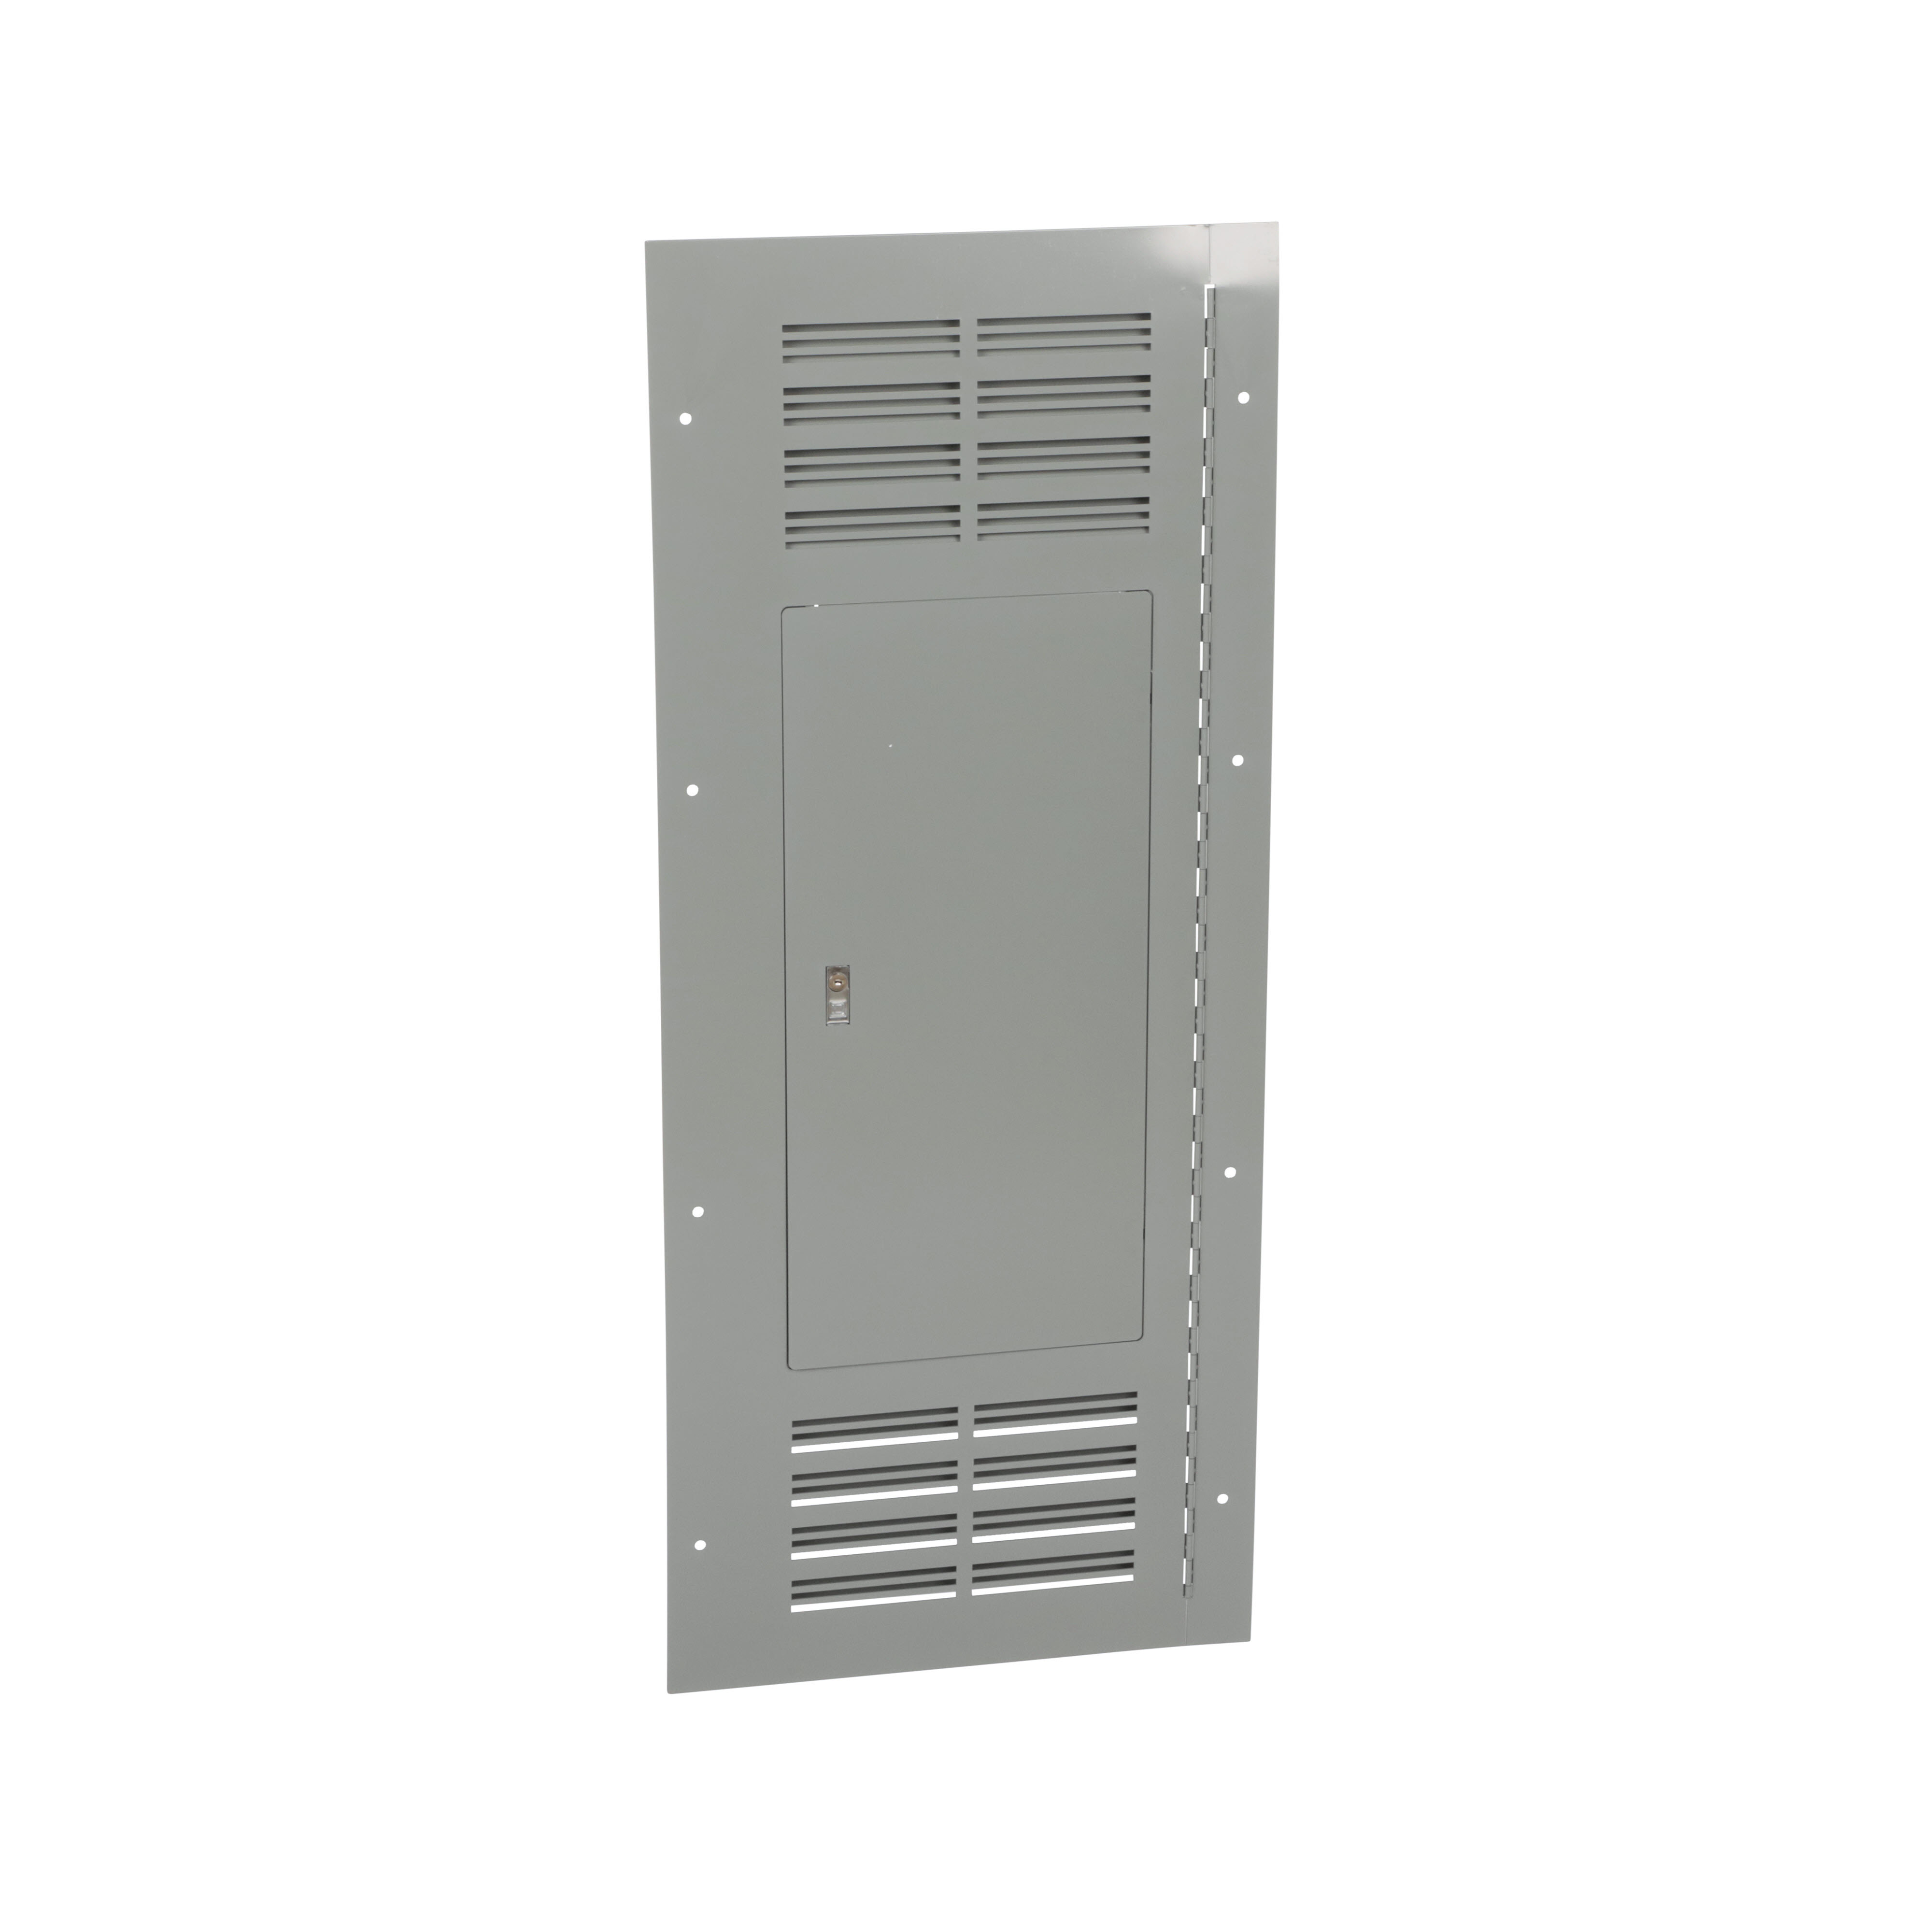 Enclosure cover, NQ and NF panelboards, NEMA 1, flush, ventilated, hinged, 20in W x 50in H